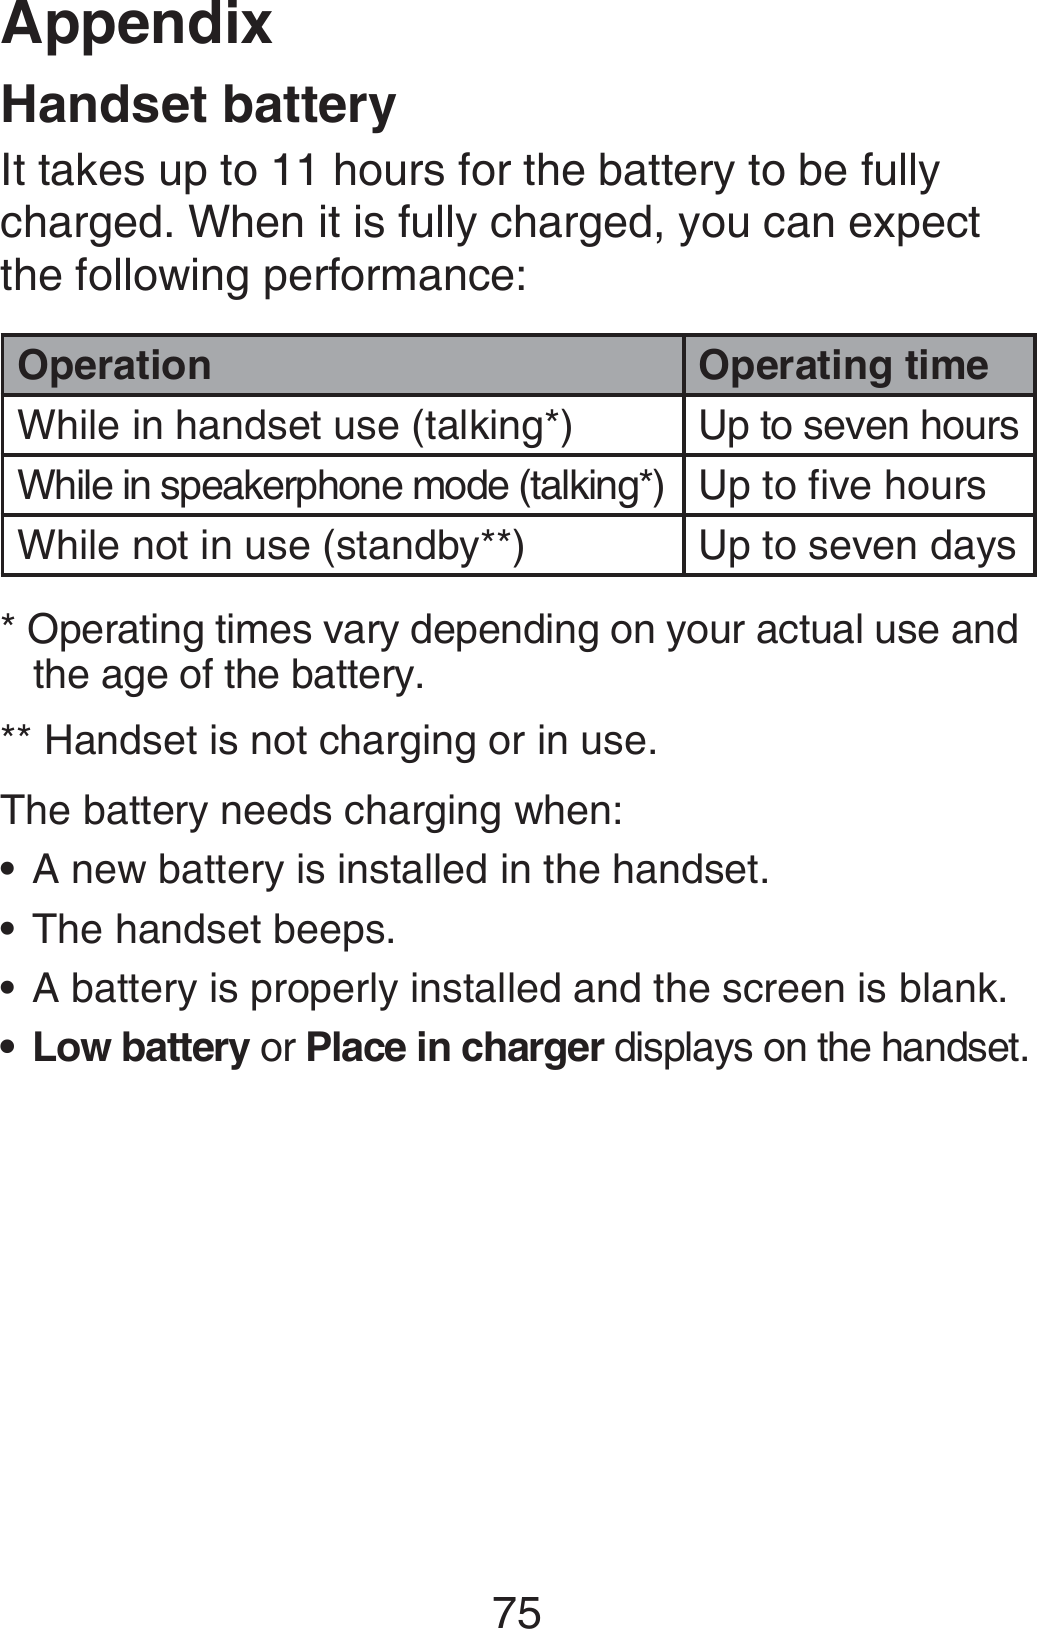 75Handset batteryIt takes up to 11 hours for the battery to be fully charged. When it is fully charged, you can expect the following performance:Operation Operating timeWhile in handset use (talking*) Up to seven hoursWhile in speakerphone mode (talking*) Up to five hoursWhile not in use (standby**) Up to seven days* Operating times vary depending on your actual use and    the age of the battery.** Handset is not charging or in use.The battery needs charging when:A new battery is installed in the handset.The handset beeps.A battery is properly installed and the screen is blank.Low battery or Place in charger displays on the handset.••••Appendix